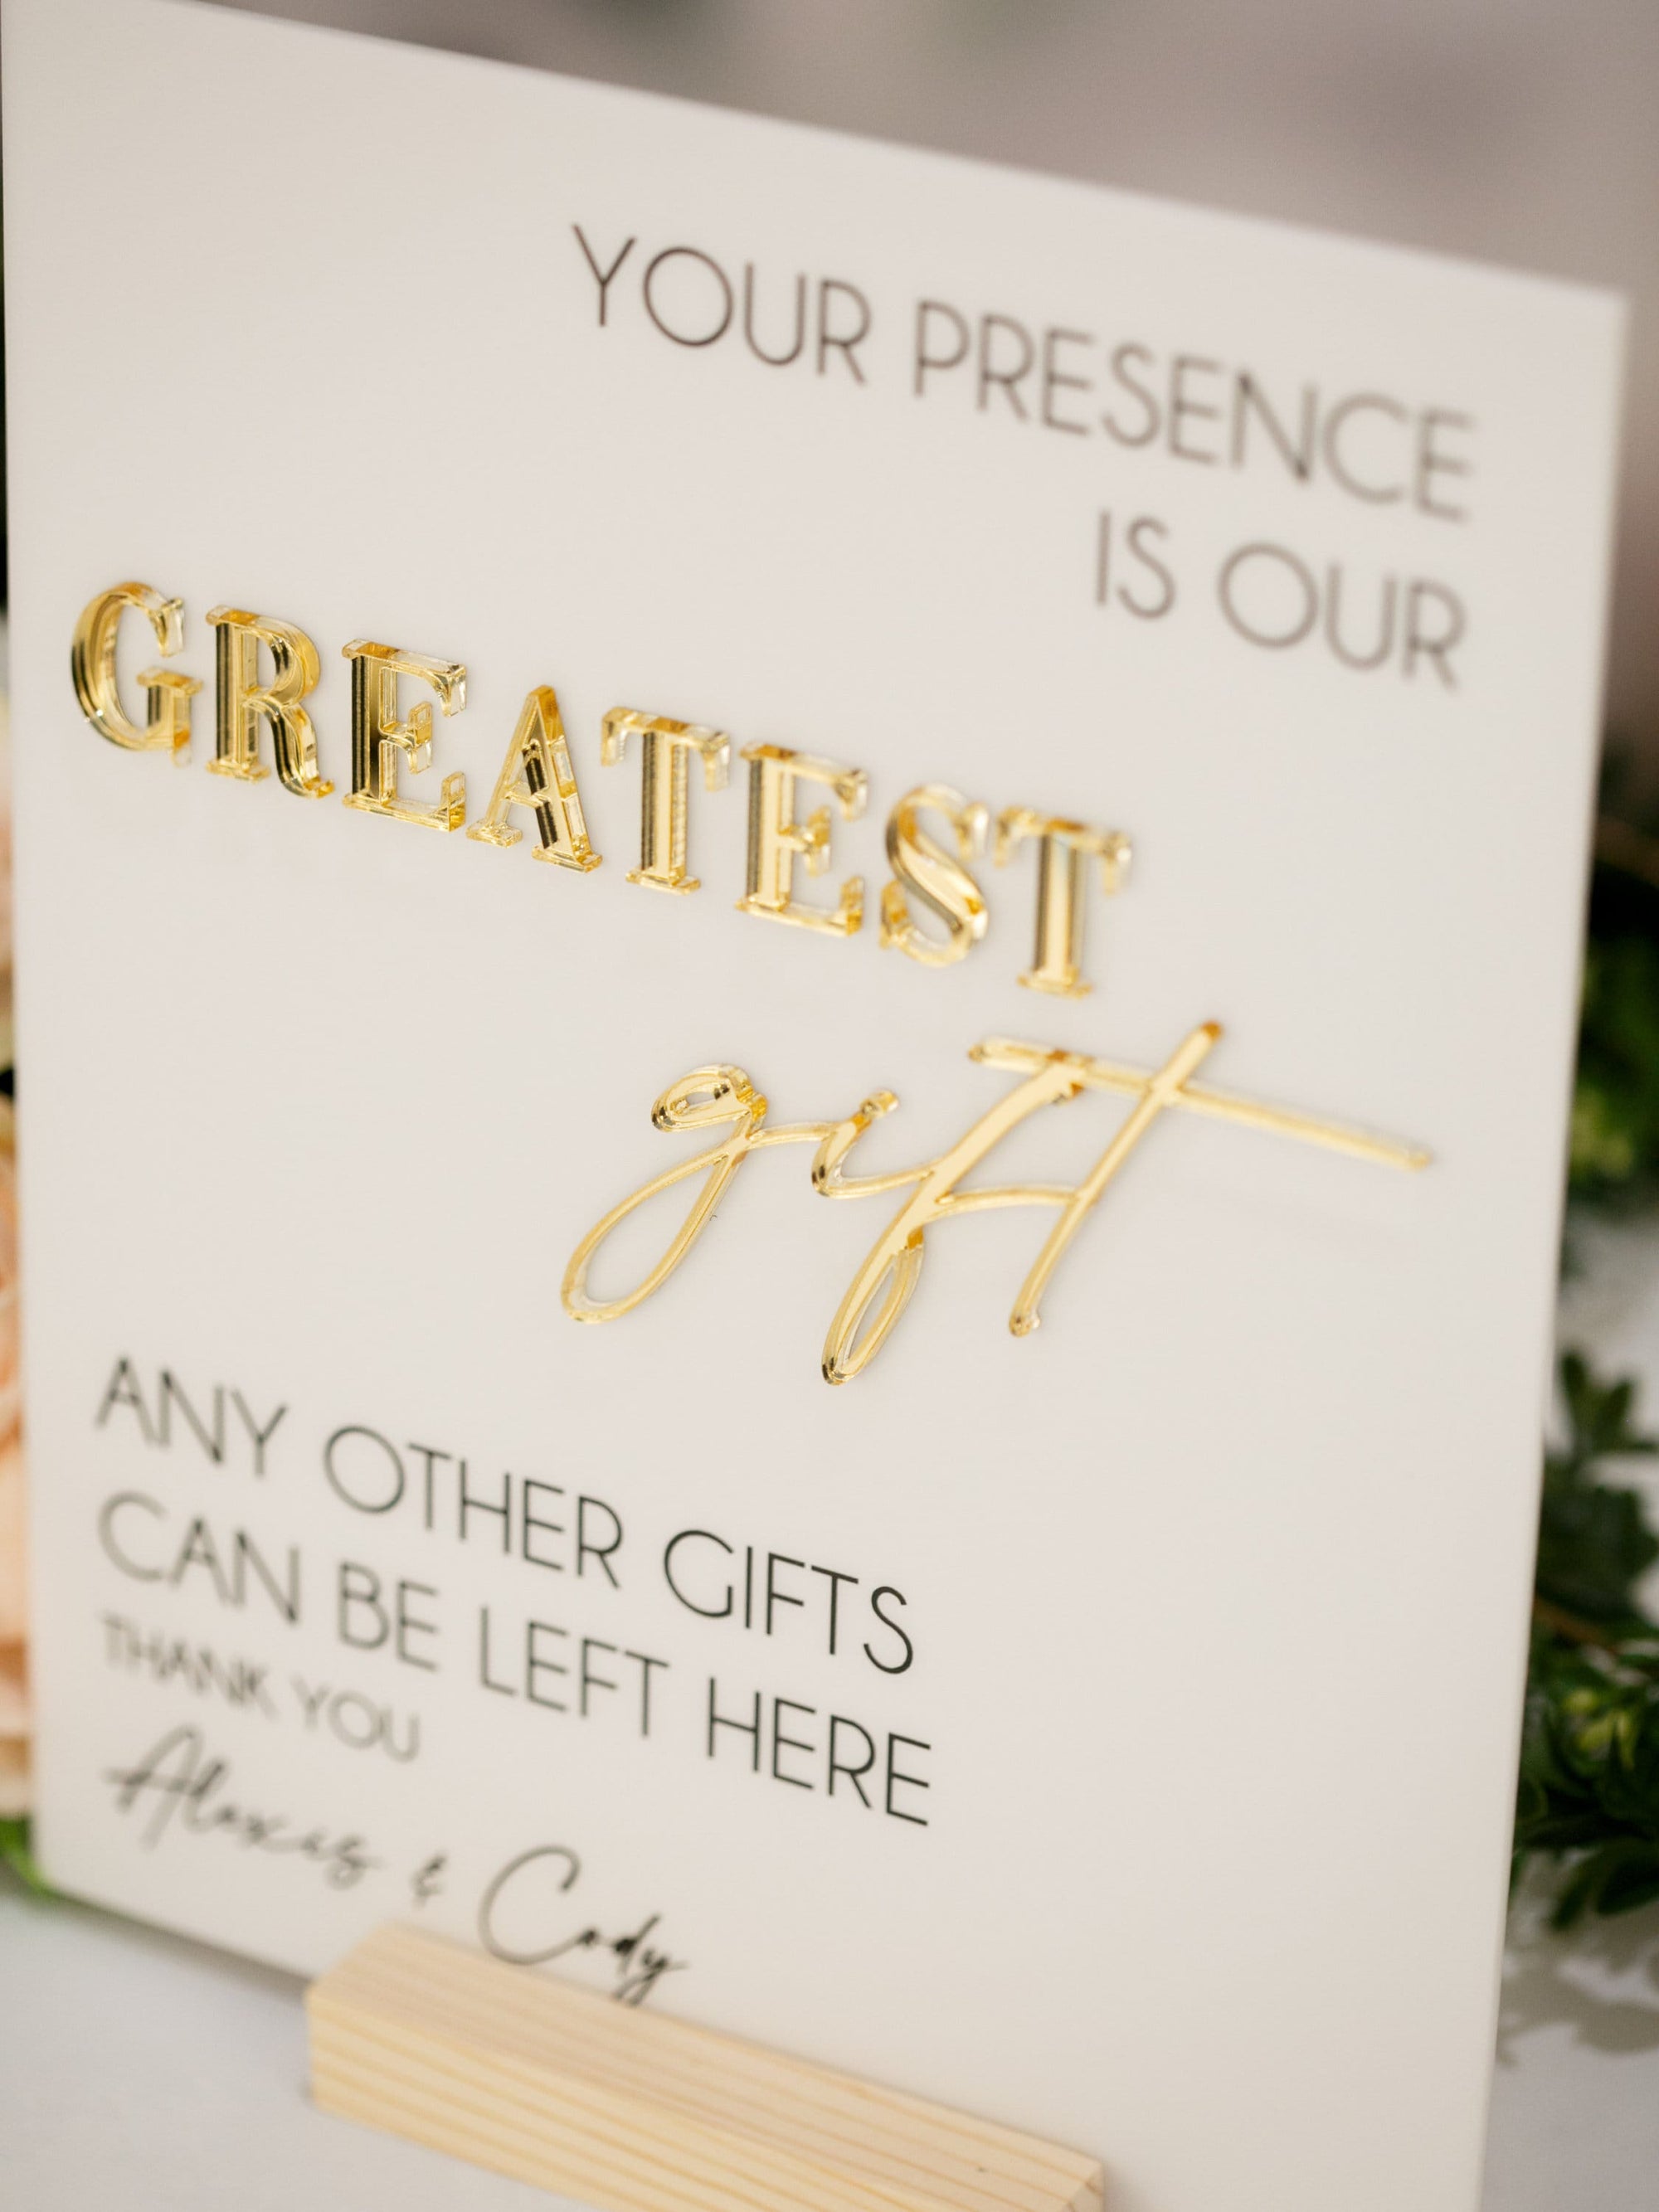 3D Mirror Your Presence Is Our Greatest Gift, Any Other Gifts Can Be Left Here Acrylic Wedding Sign, Cards Perspex Table Gift Table Signage